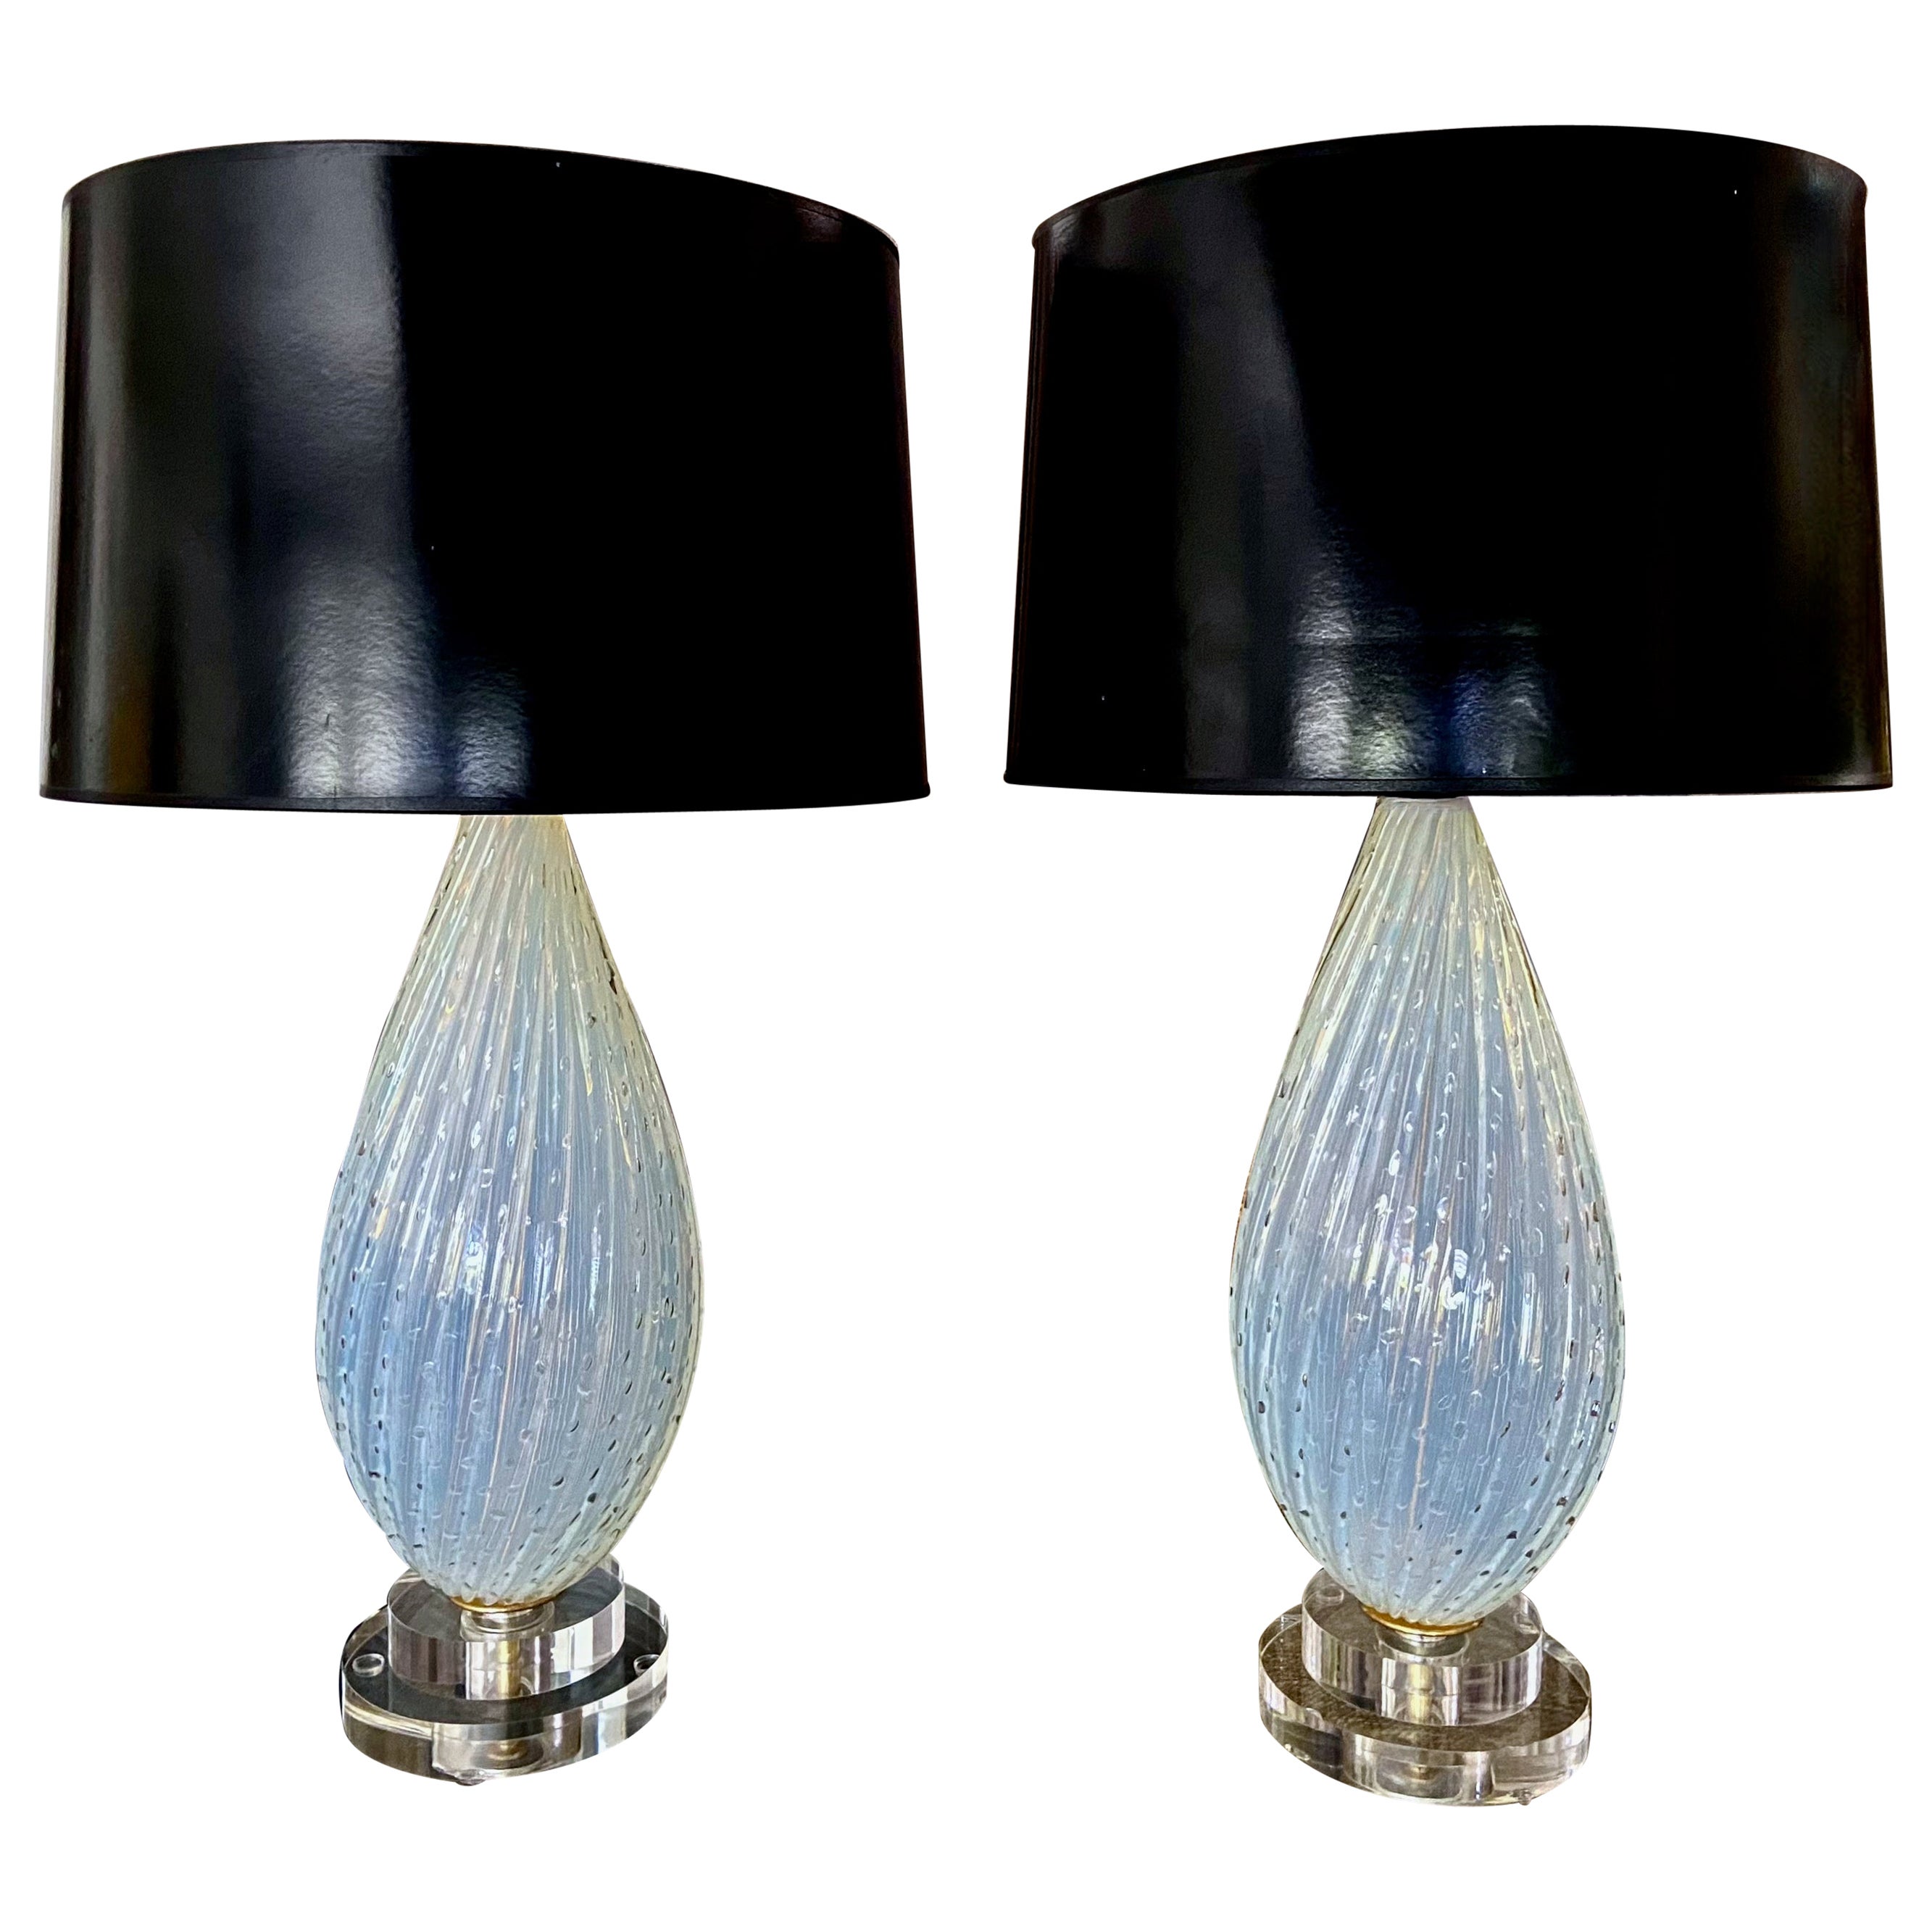 Pair of Murano Venetian hand blown ribbed opalescent glass table lamps with controlled bubbles. The color is opaque white with light shade of blue. New custom acrylic bases, rewired with new brass 3 way sockets and French style twisted rayon covered